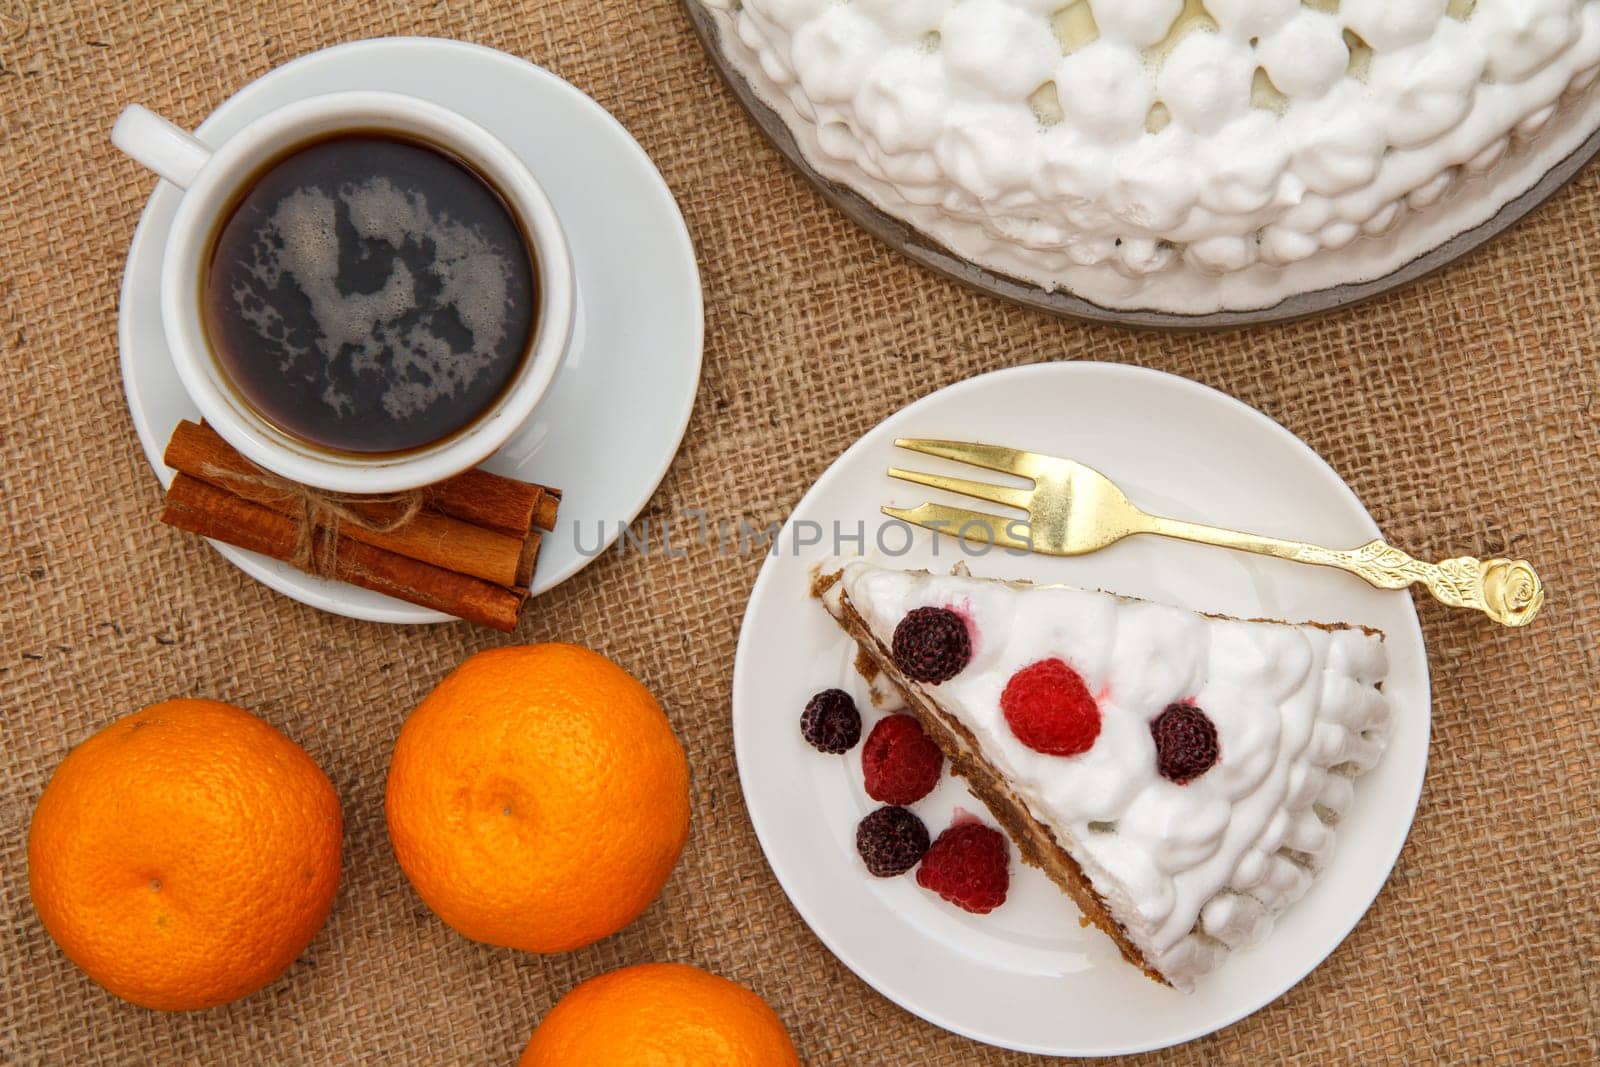 Cup of coffee, cinnamon, fork and slice of biscuit cake decorated with whipped cream and raspberries, oranges on table with sackcloth. Top view.